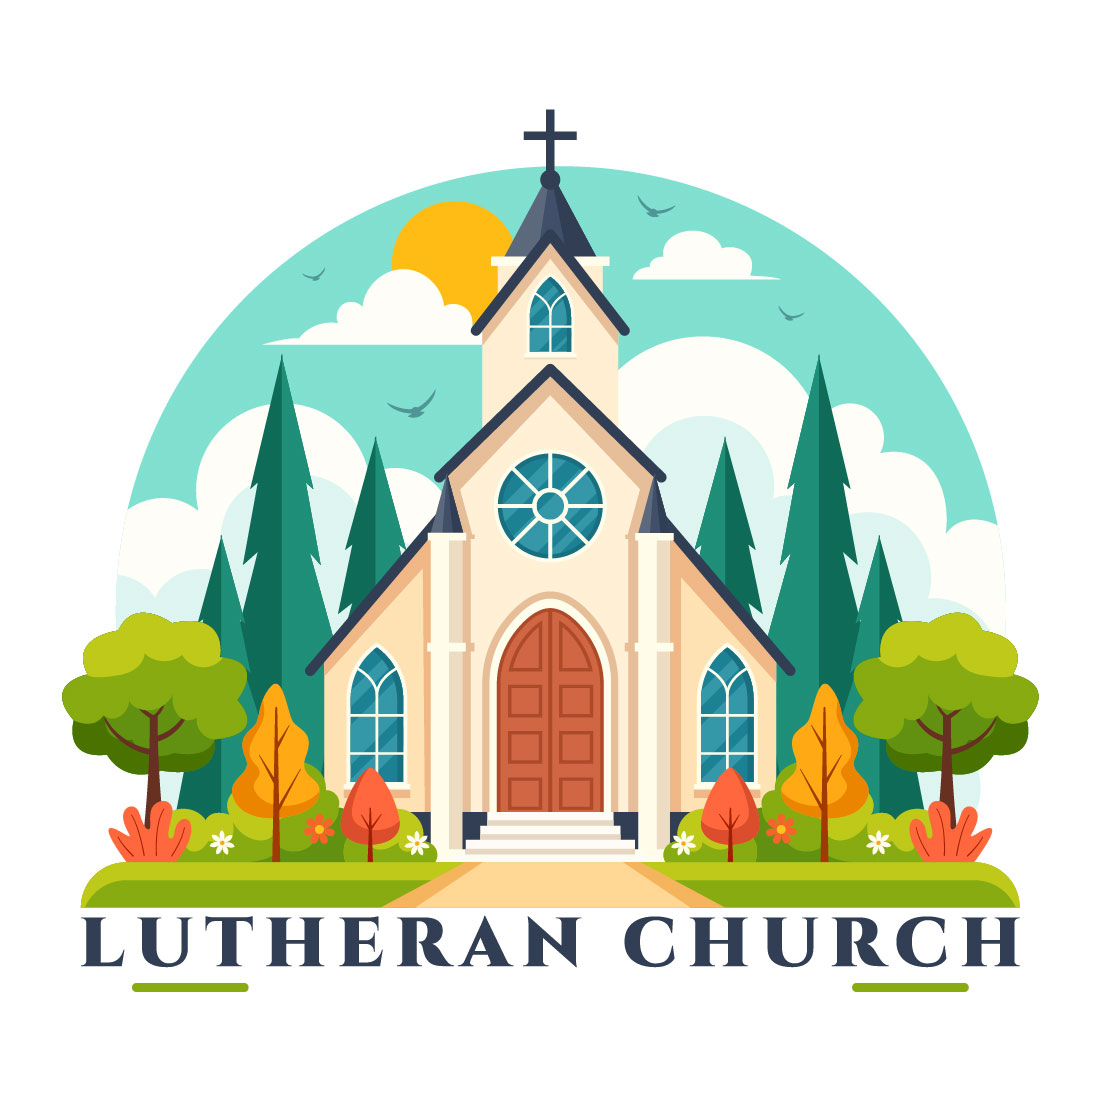 9 Lutheran Church Illustration cover image.